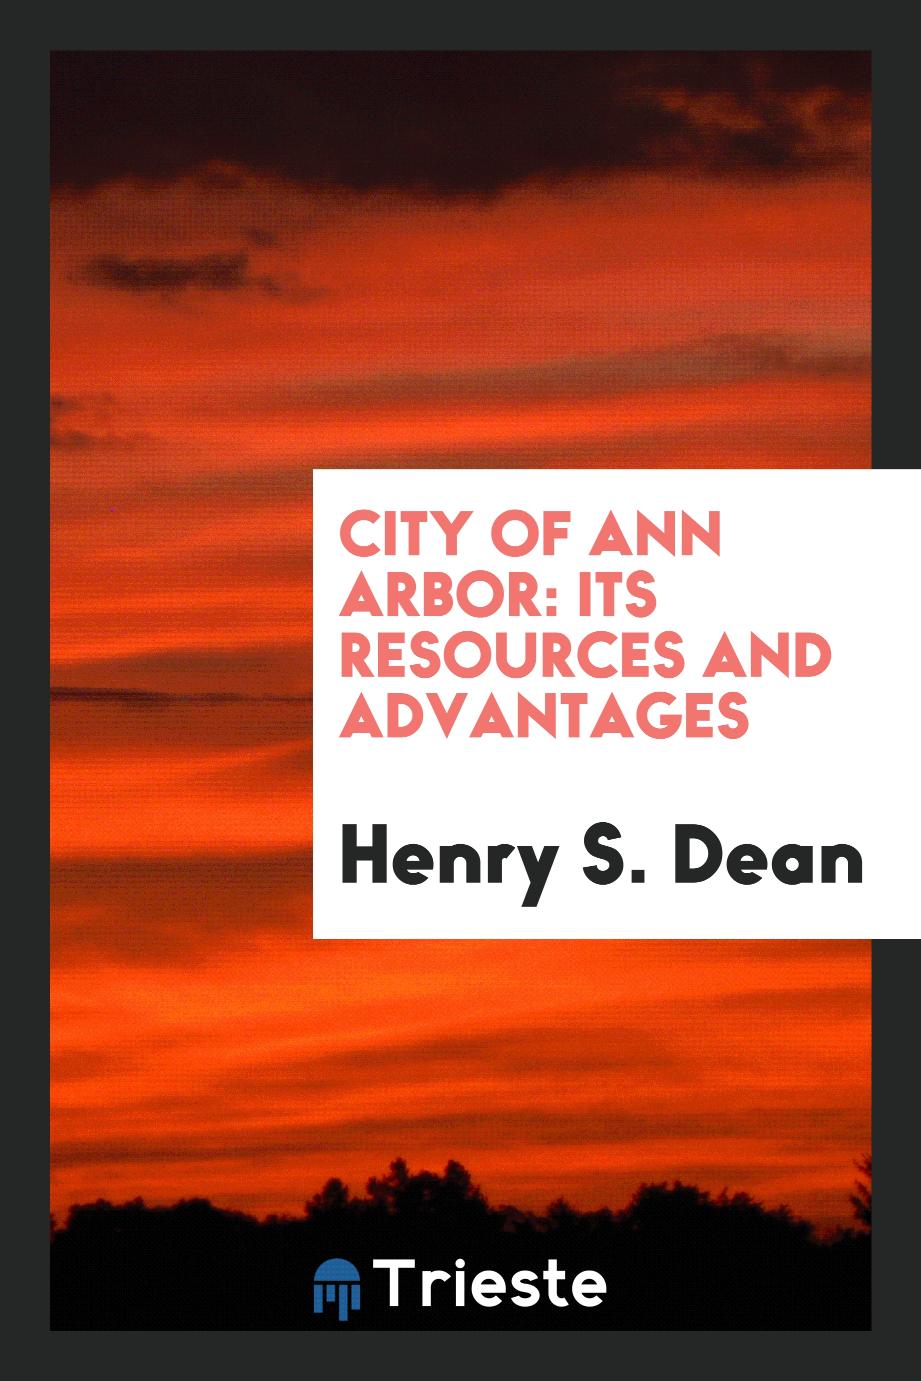 City of Ann Arbor: Its Resources and Advantages